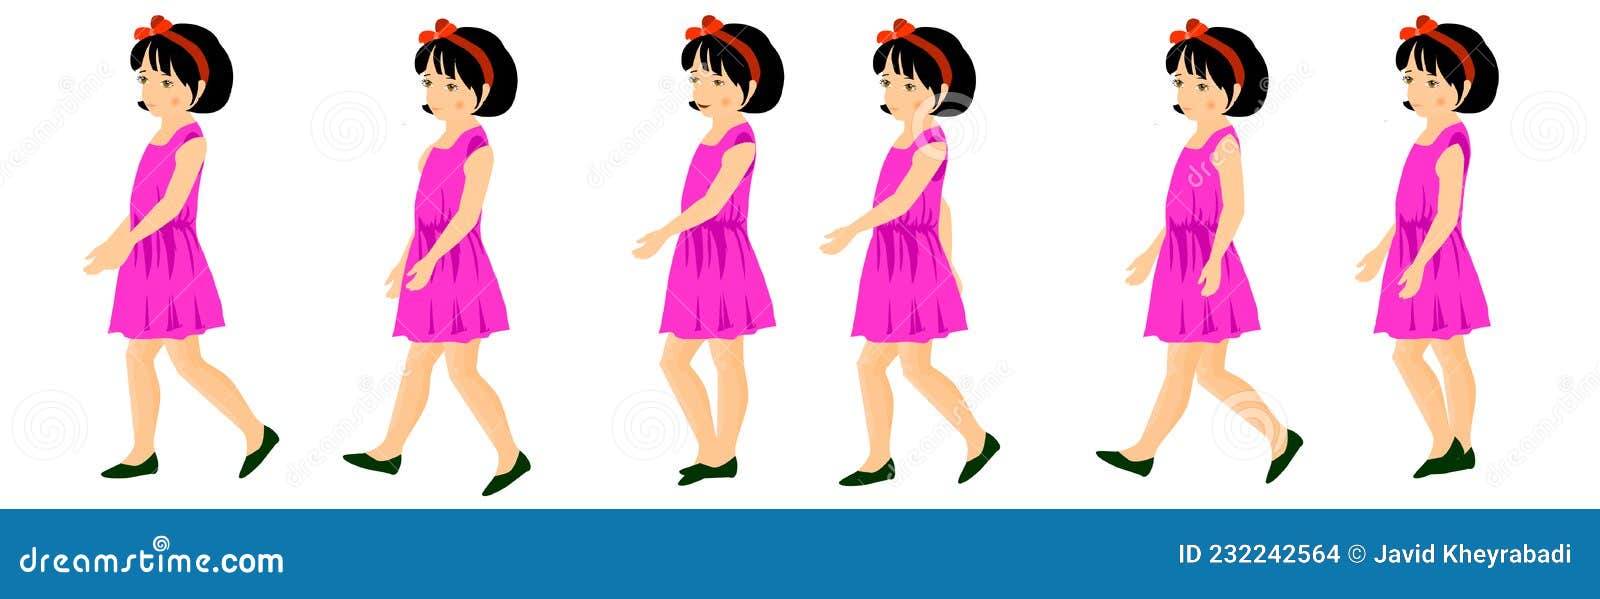 Girl Walking Animation Character Illustration on White Background Stock  Vector - Illustration of character, people: 232242564